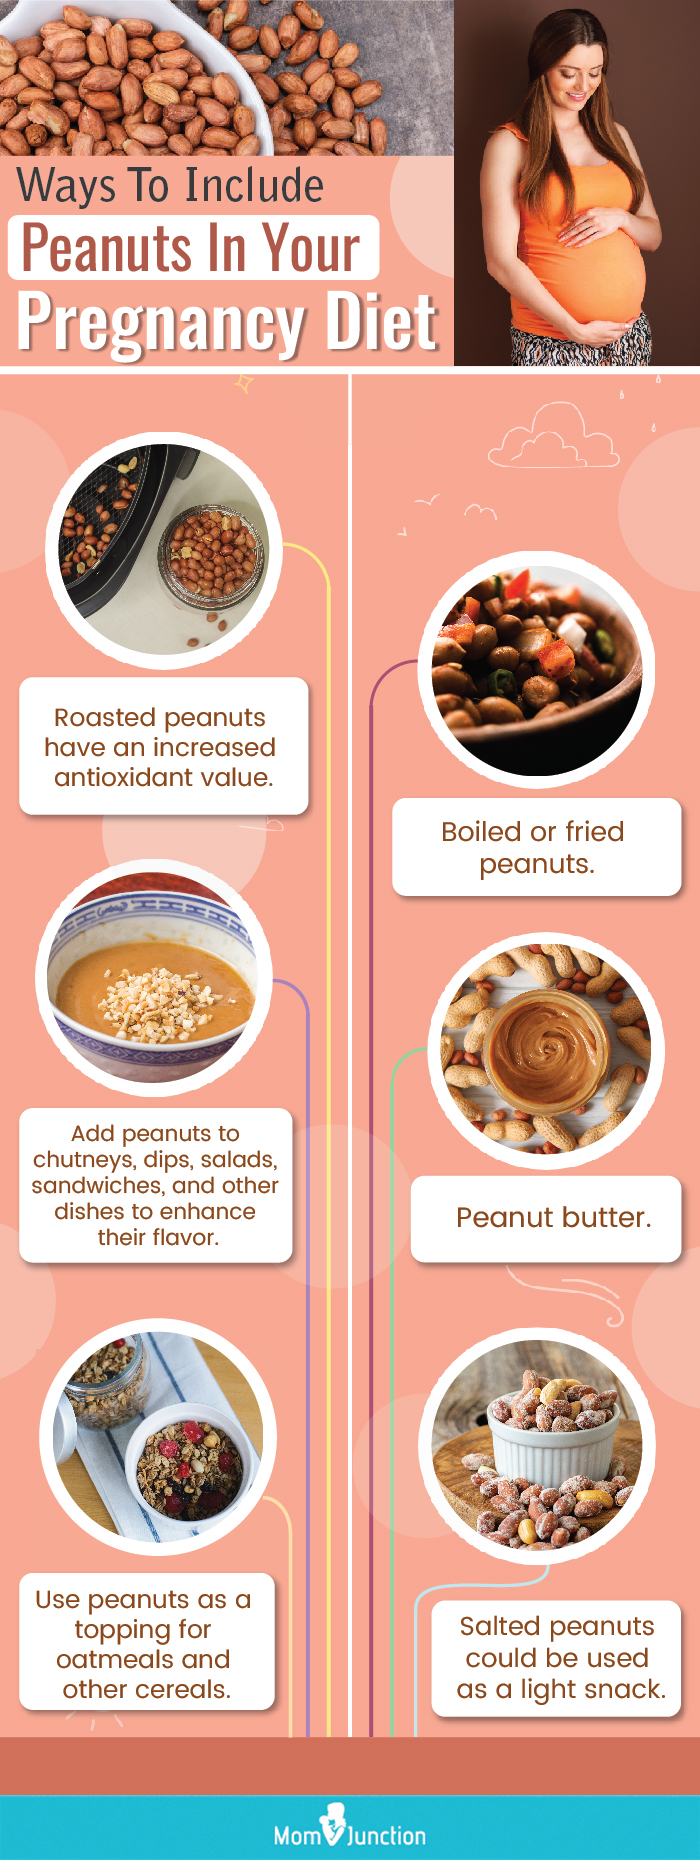 ways to eat peanuts during pregnancy (infographic)